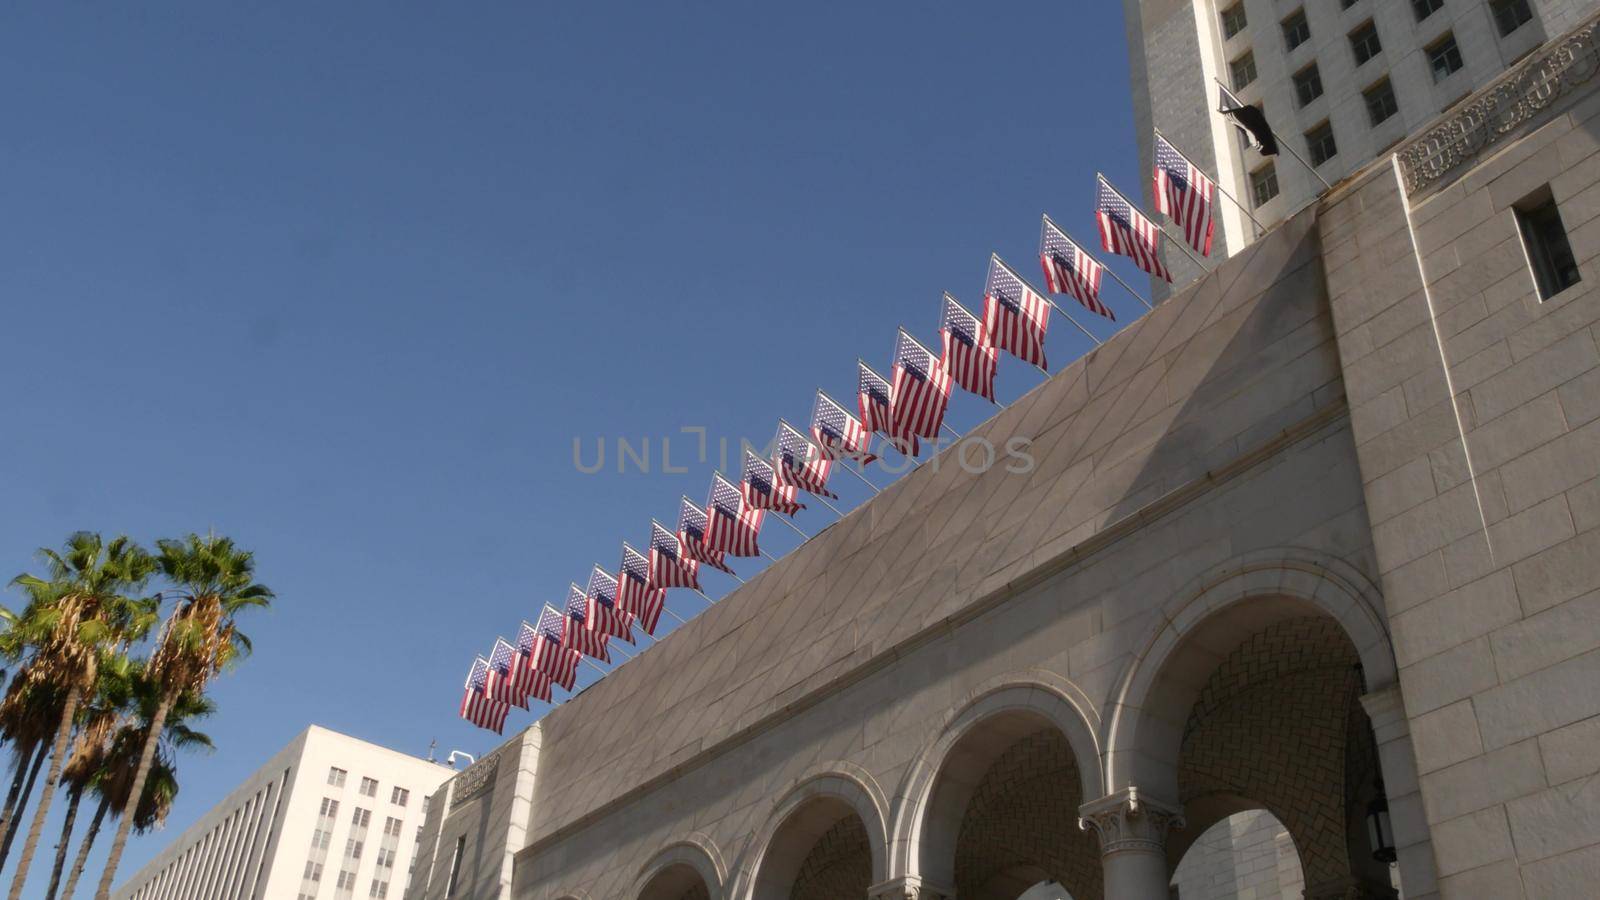 LOS ANGELES, CALIFORNIA, USA - 30 OCT 2019: City Hall highrise building exterior in Grand Park. Mayor's office in downtown. Municipal civic center, federal authority, headquarters of government in LA by DogoraSun